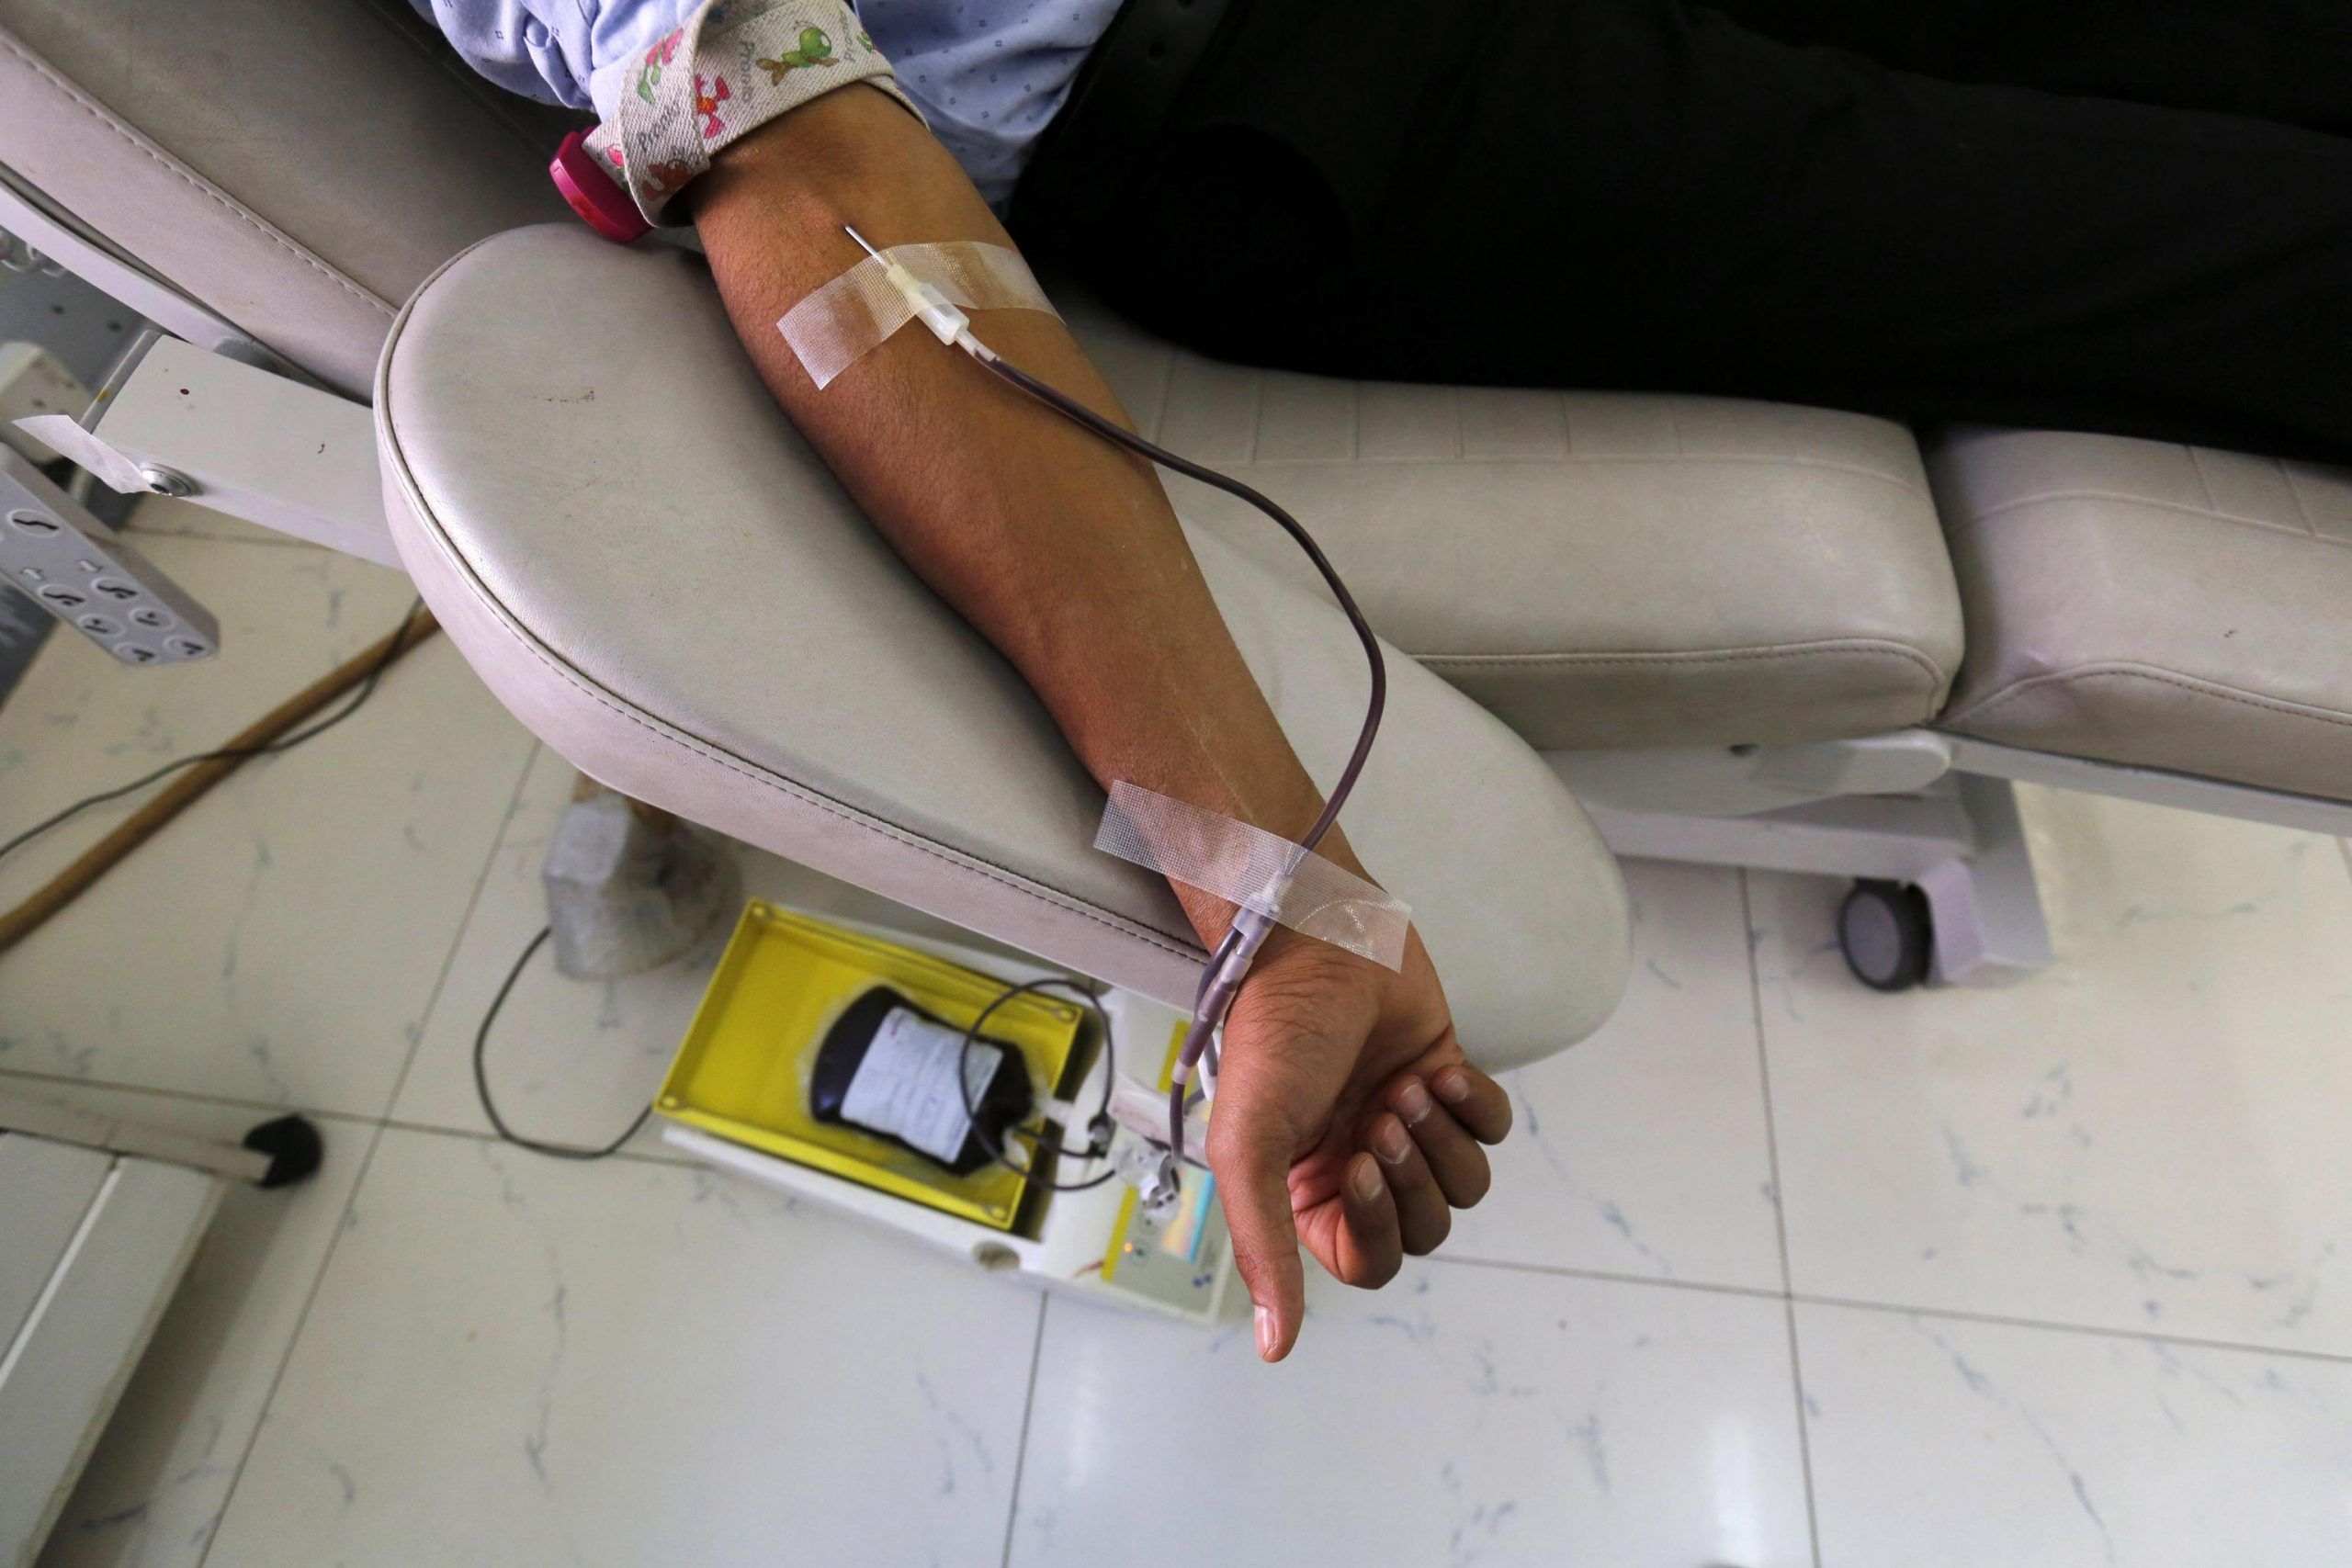 Yemenis donate blood for the victims of ongoing conflict